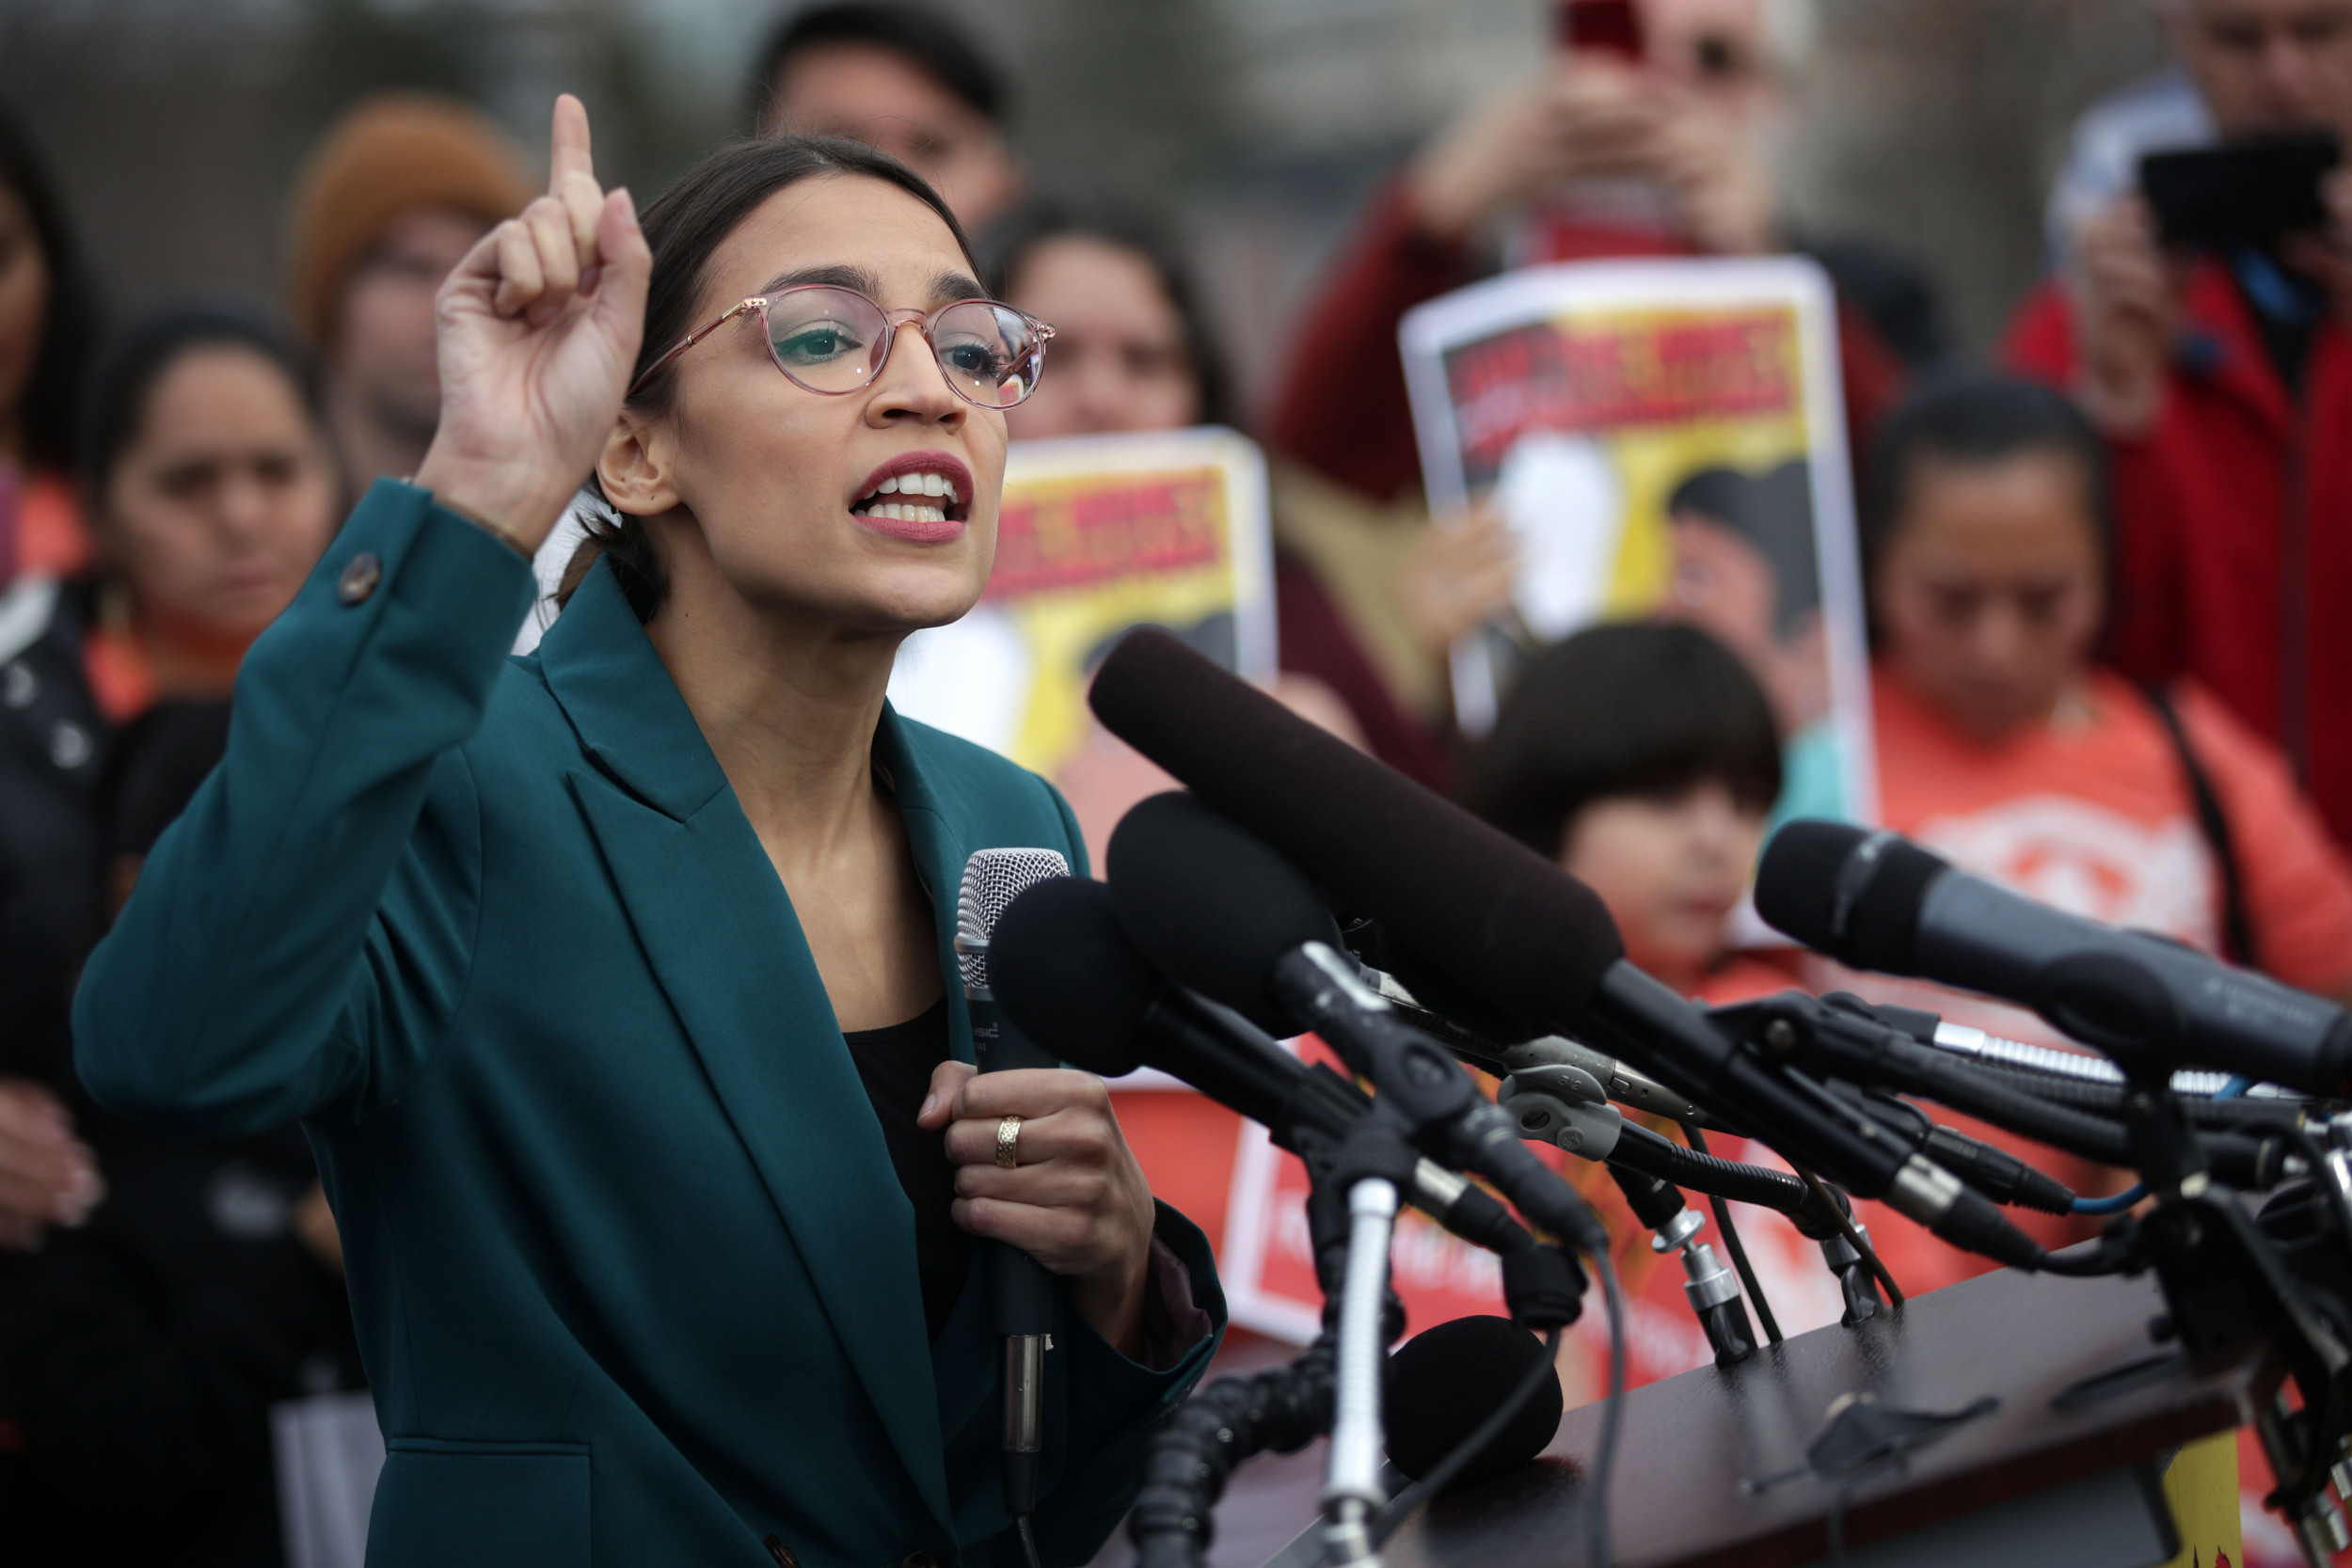 Aoc Slams Gop For Green New Deal Lies During Vp Debate Says It Will Be A Massive Job Creator